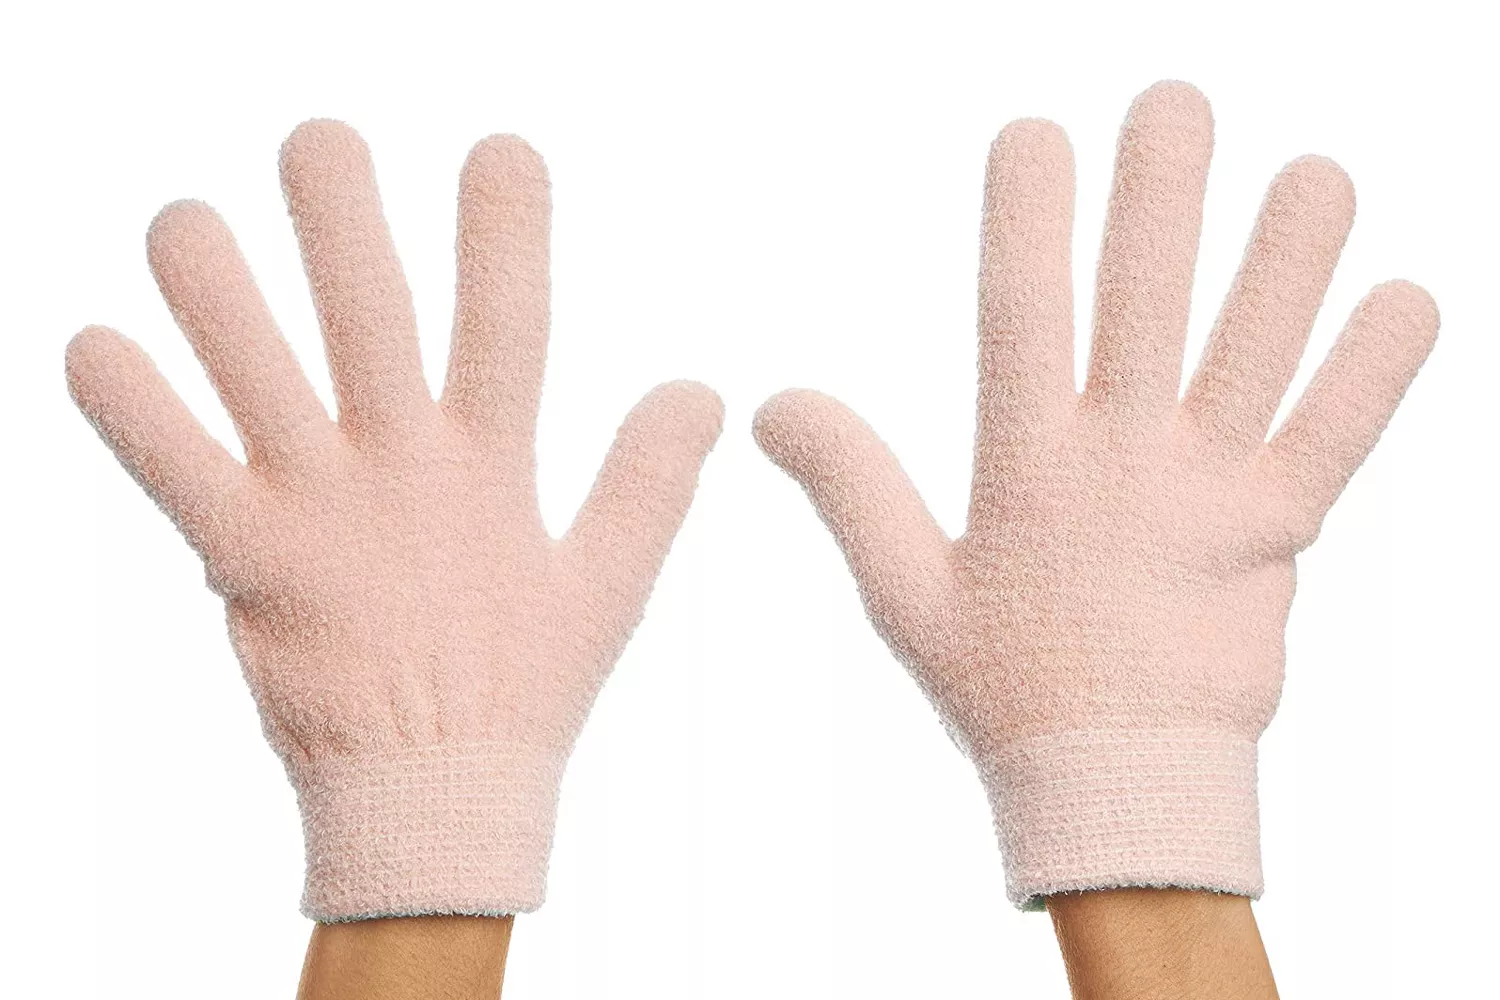 ZenToes Moisturizing Gloves with Gel Lining